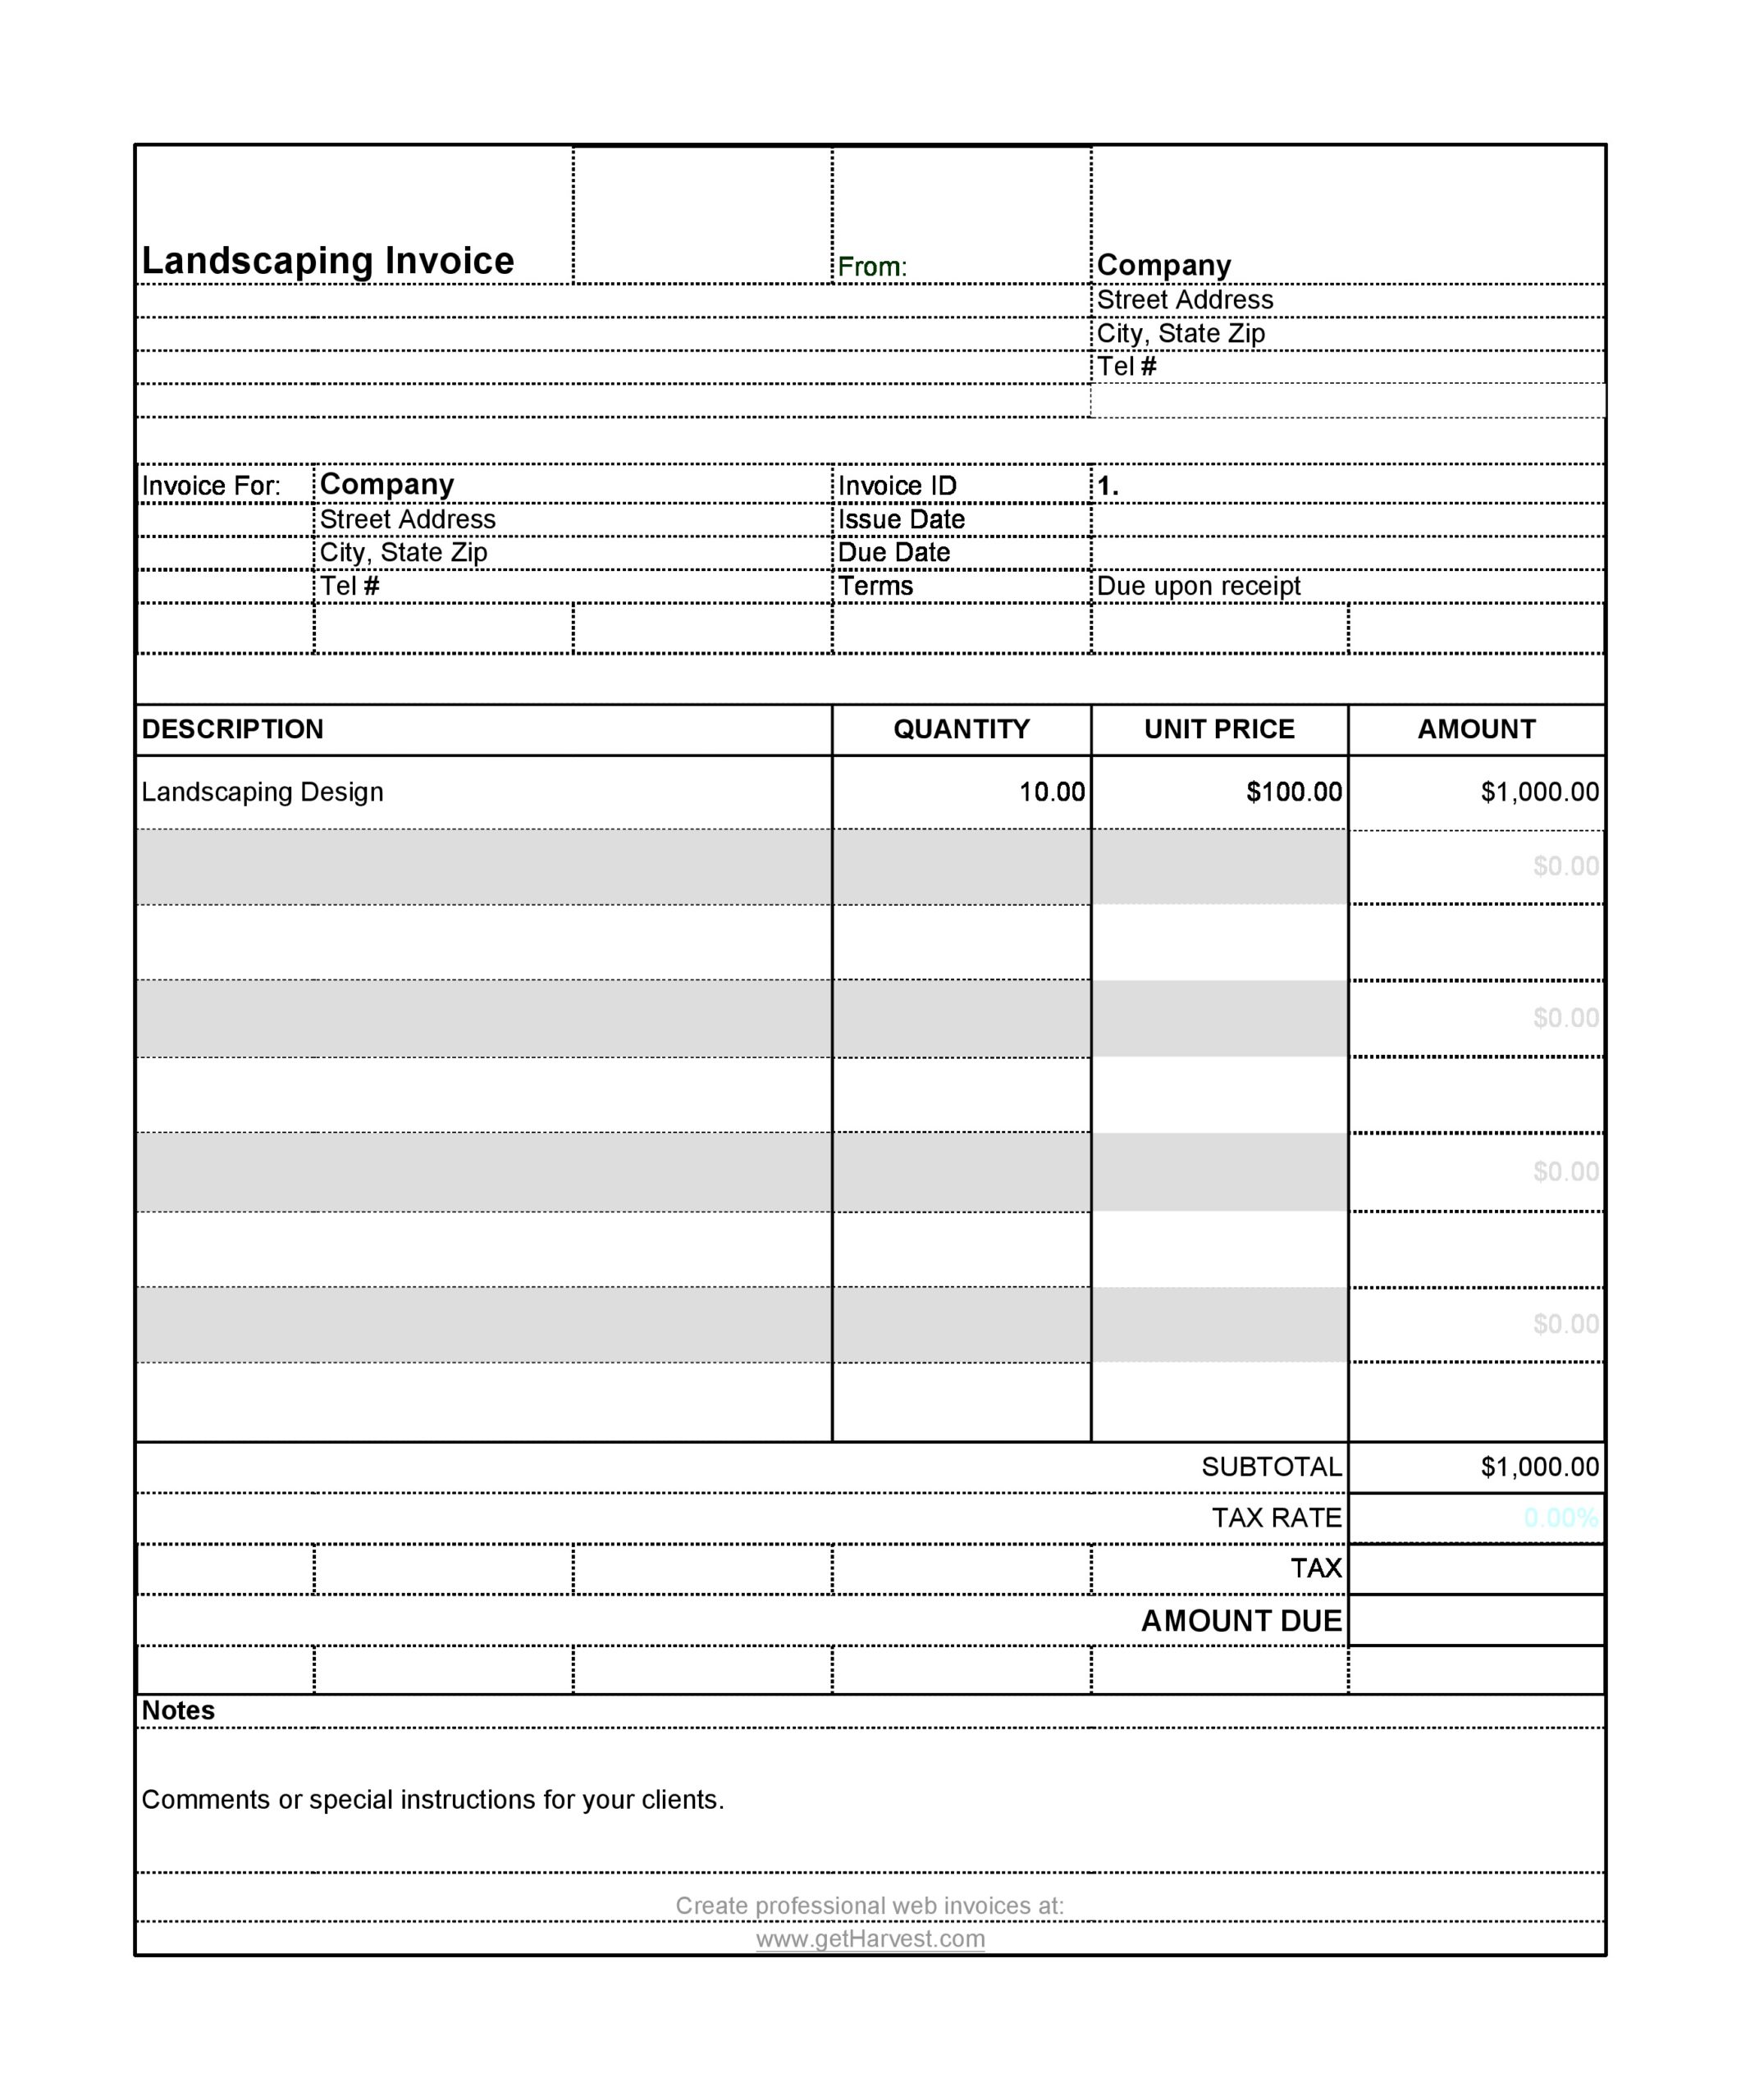 Free landscaping invoice 39